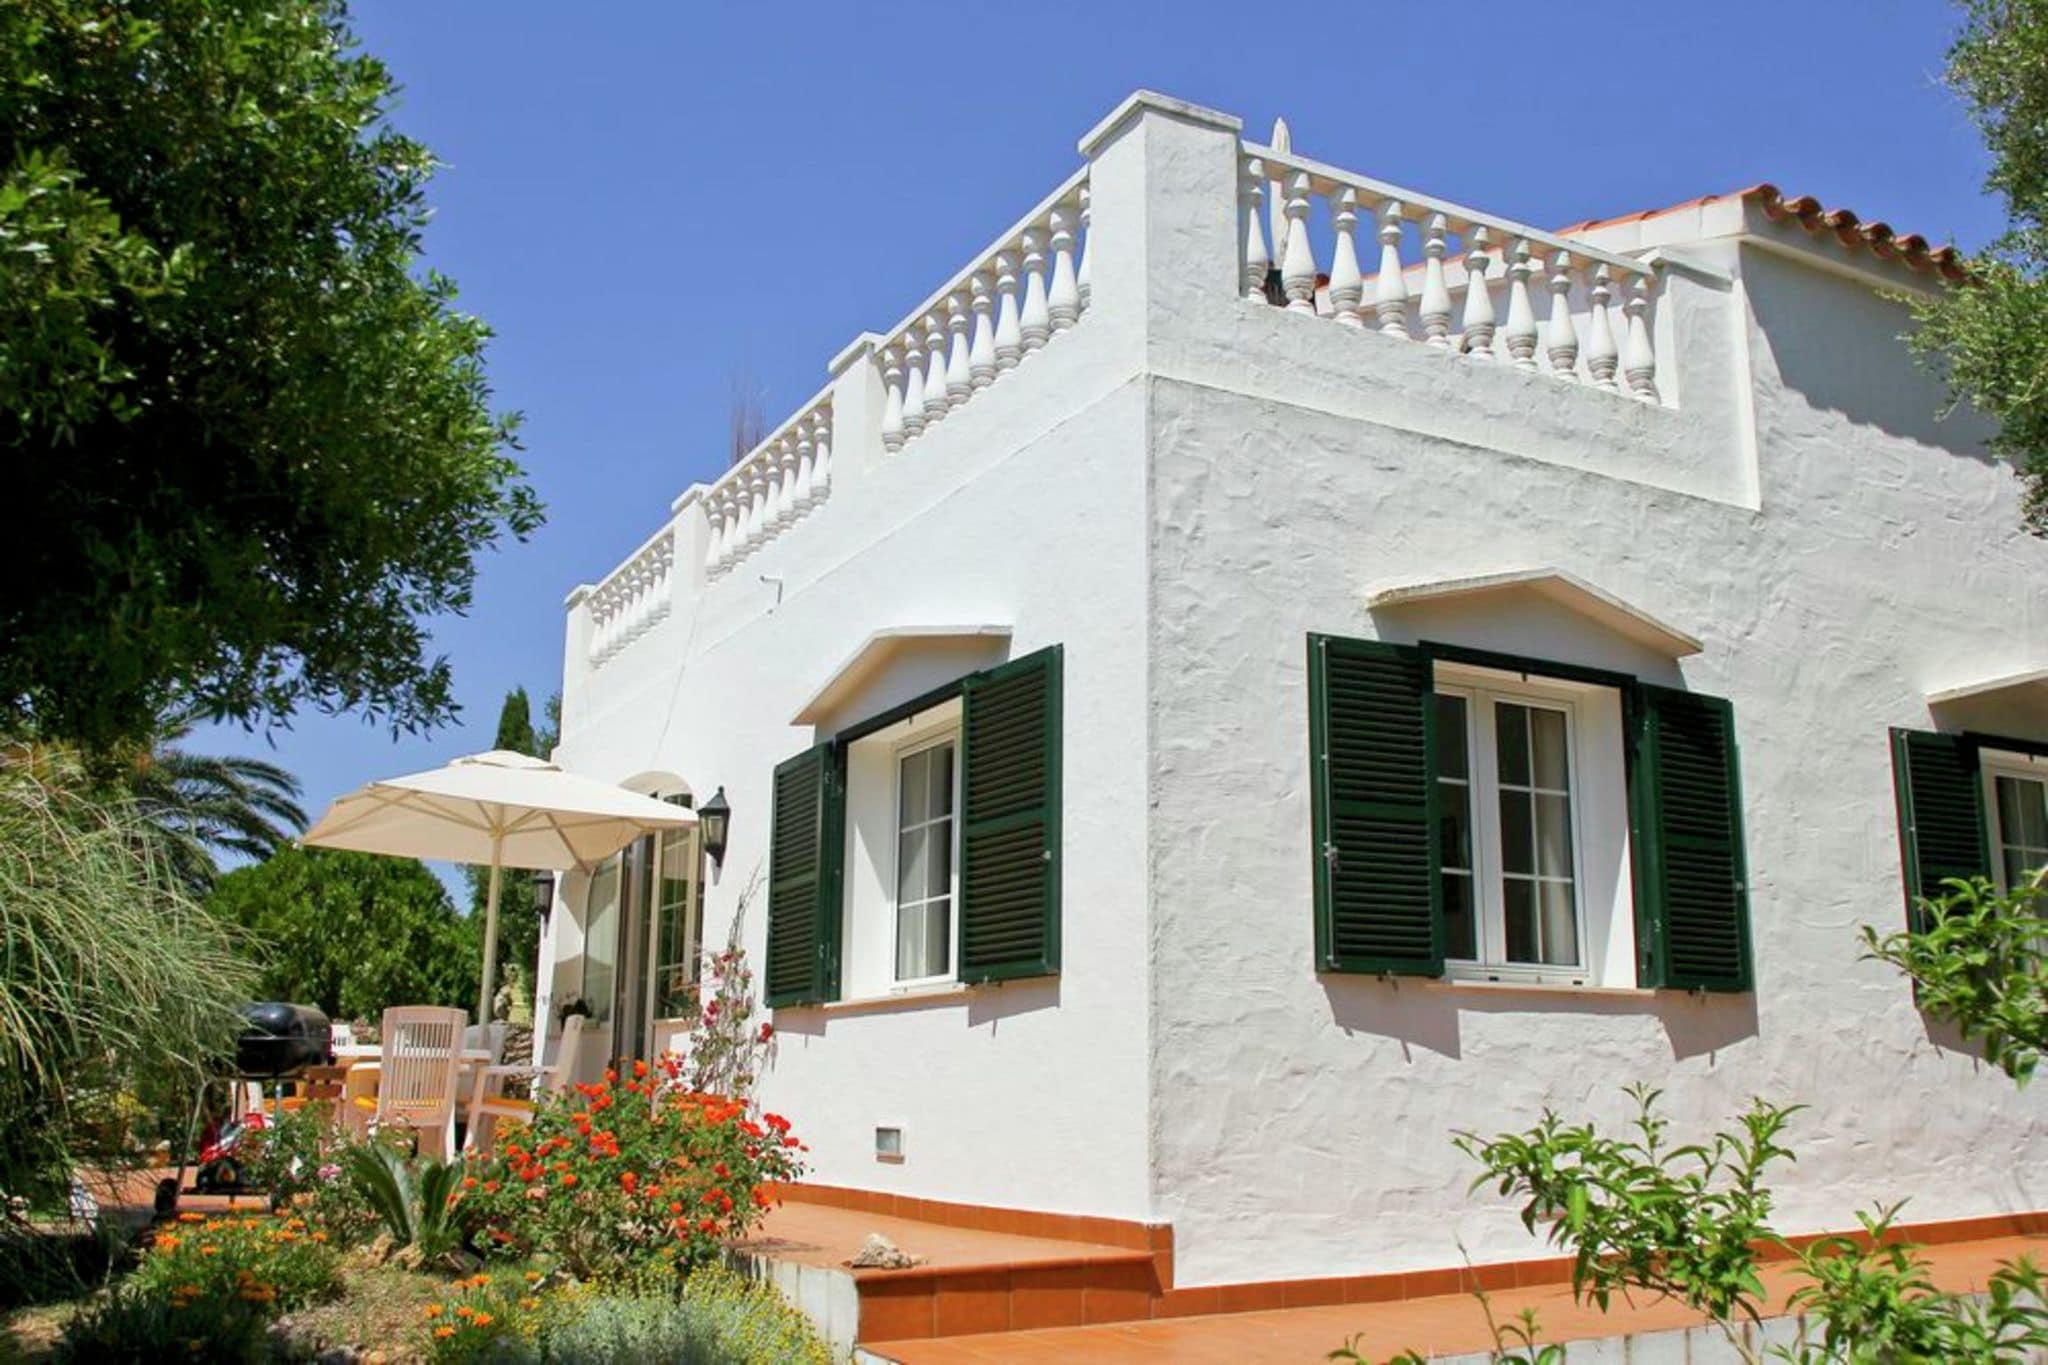 Villa with pool, garden and WIFI located 6 km from the sea in La Argentina